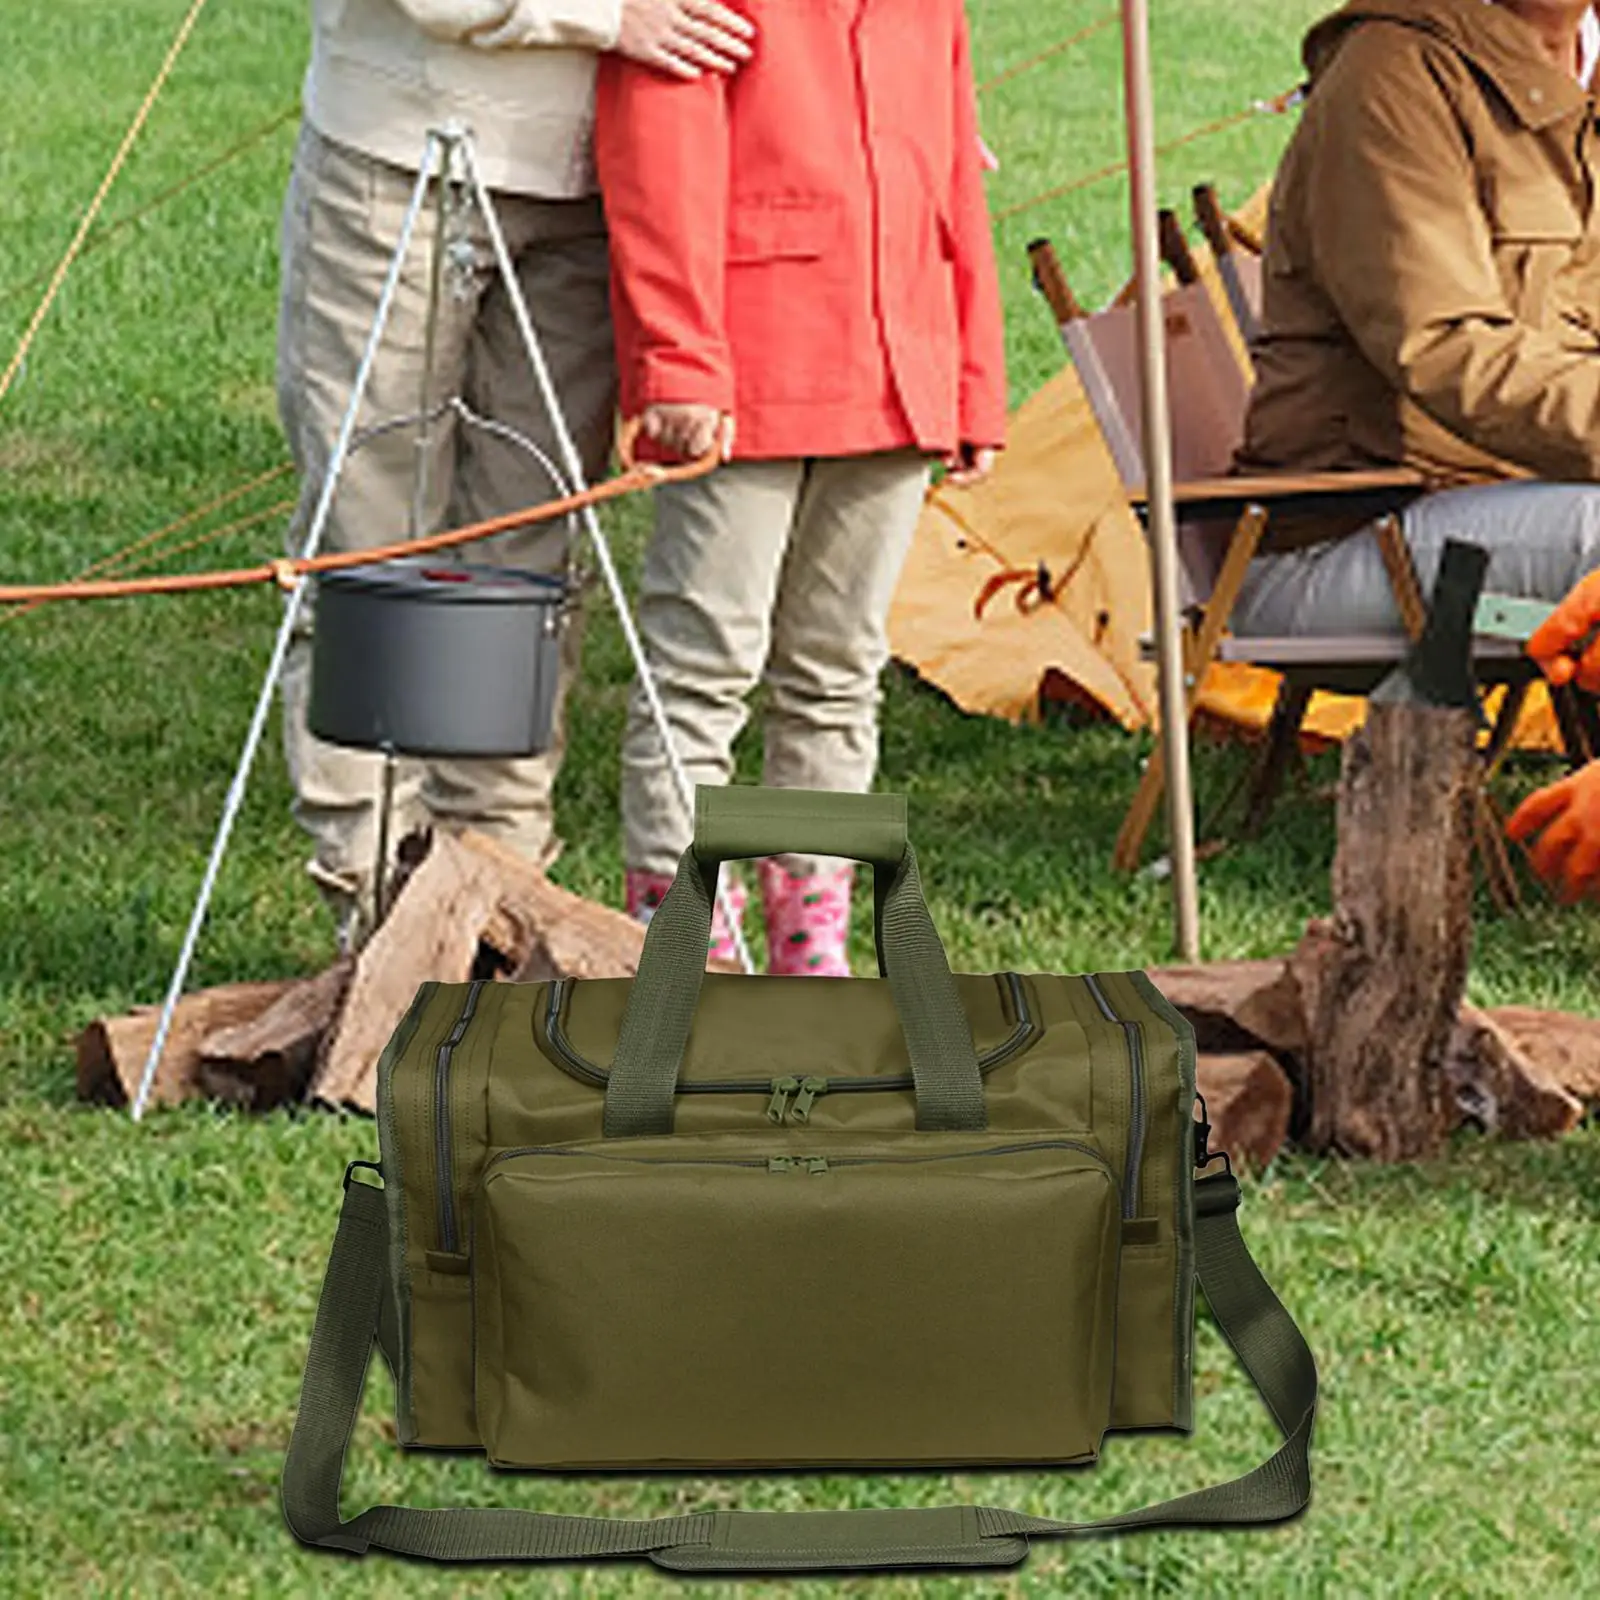 Barbecue Tool Storage Bag, Built in Compartment Durable Anti Collision Package Handbag for Outdoor Cooker Kit Party Fishing